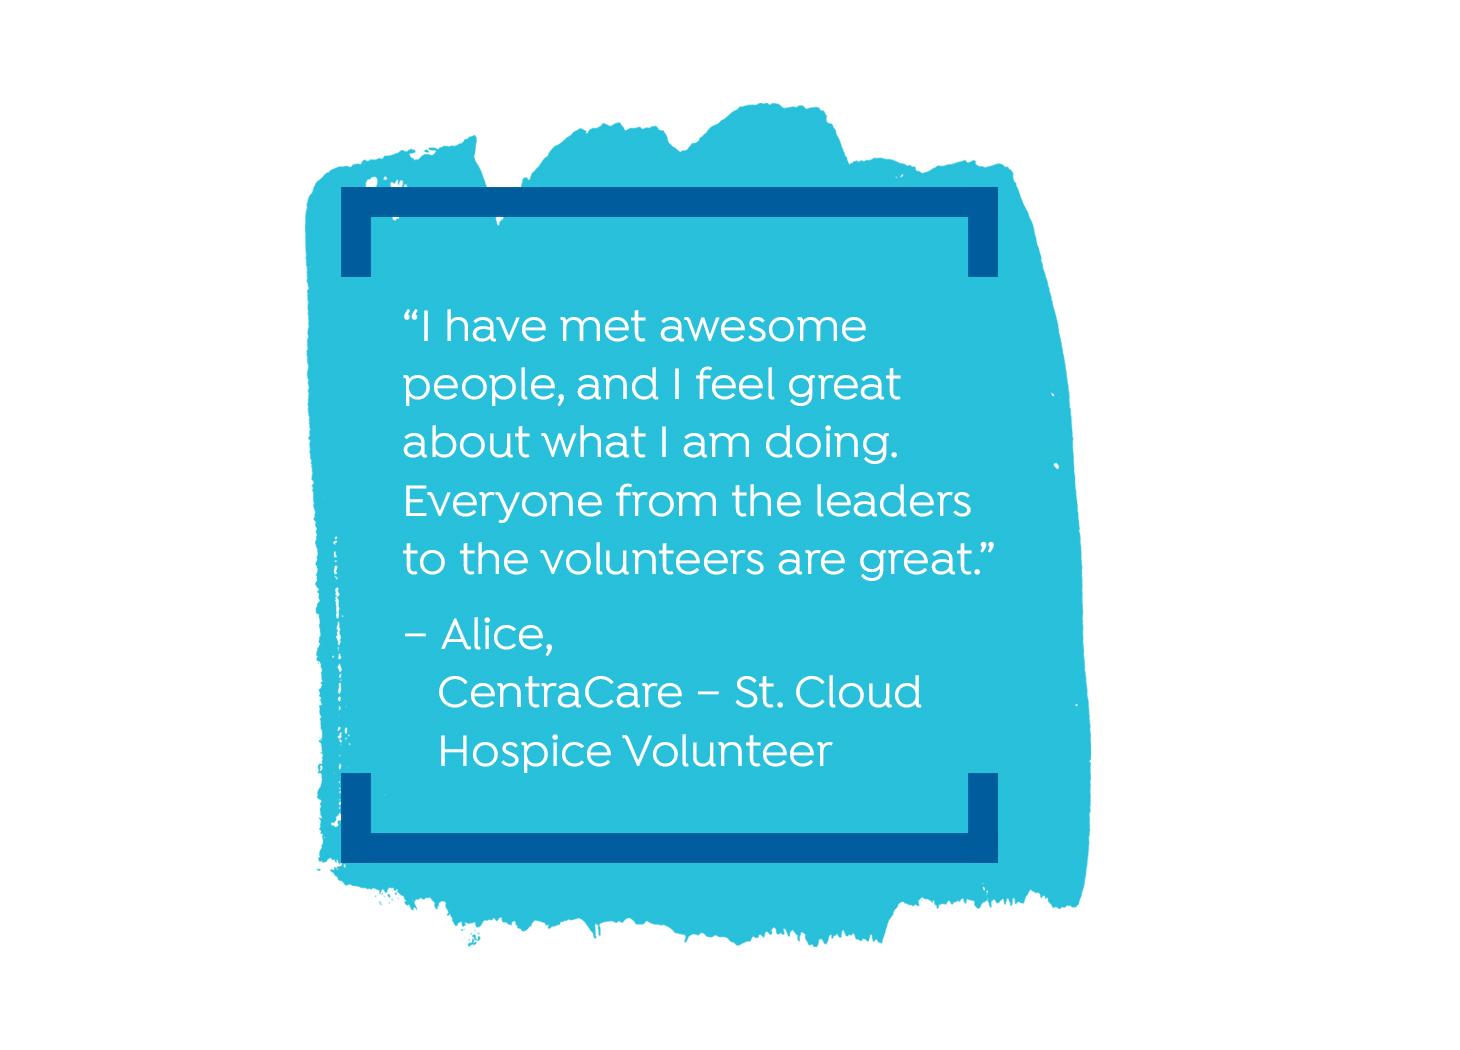 "I have met awesome people, and I feel great about what I am doing. Everyone from the leaders to the volunteers are great." -Alice